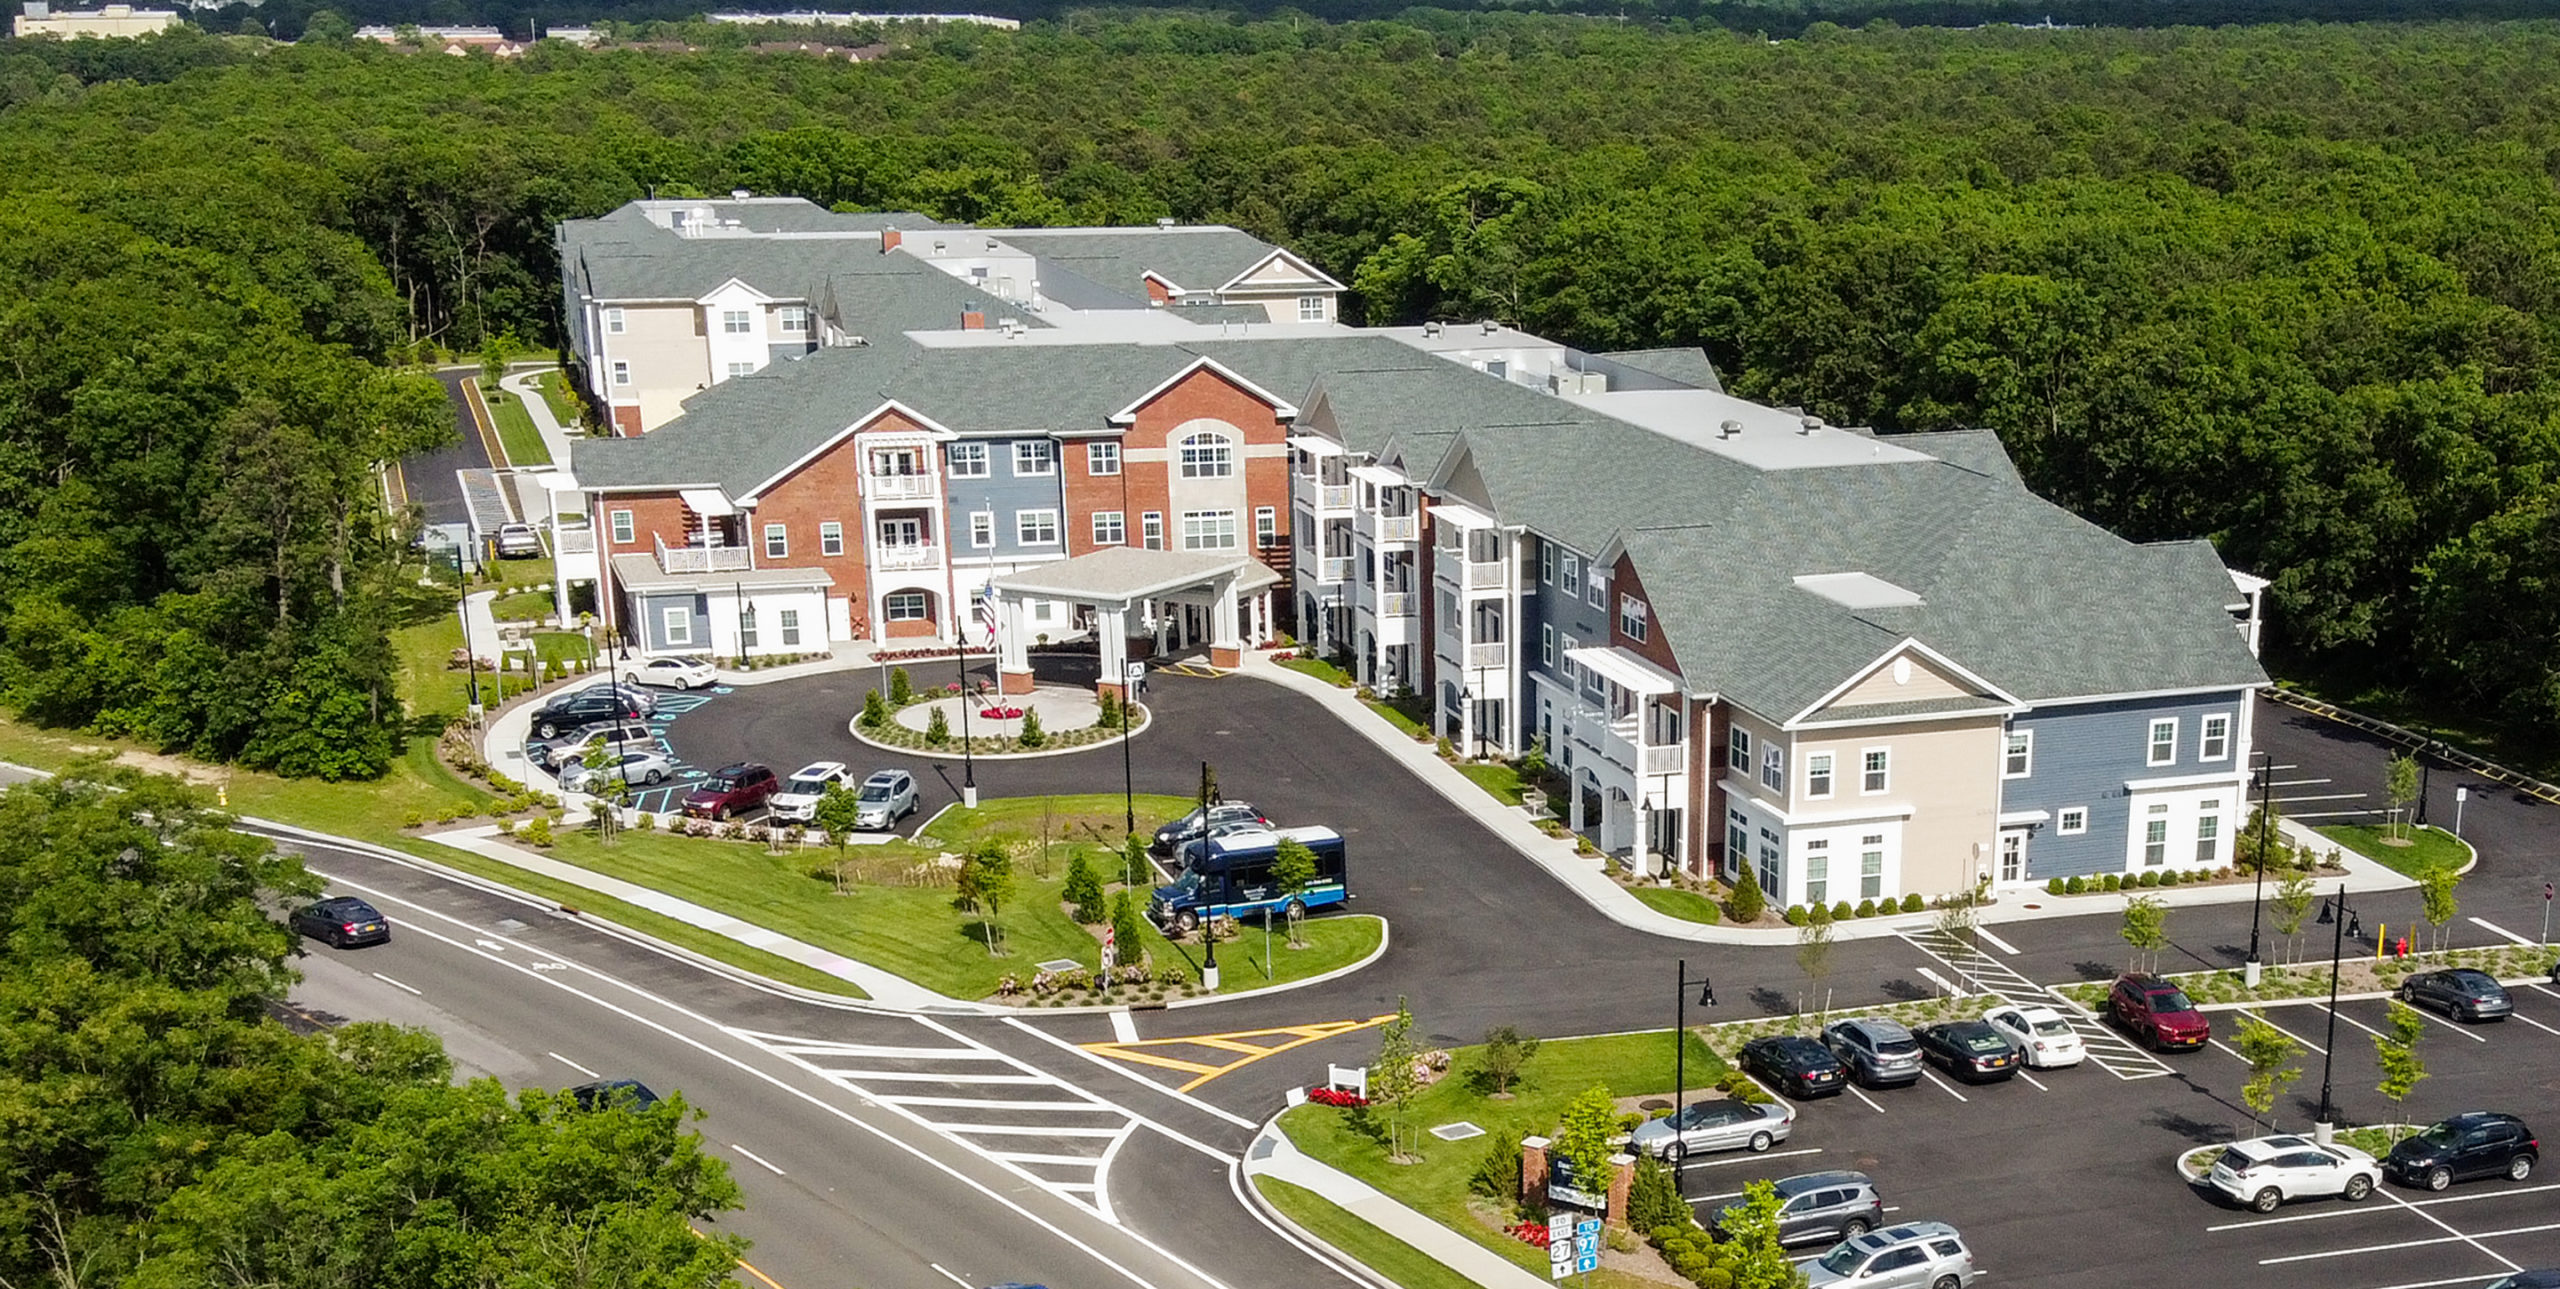 Exterior of Brightview Senior Living in Sayville, NY